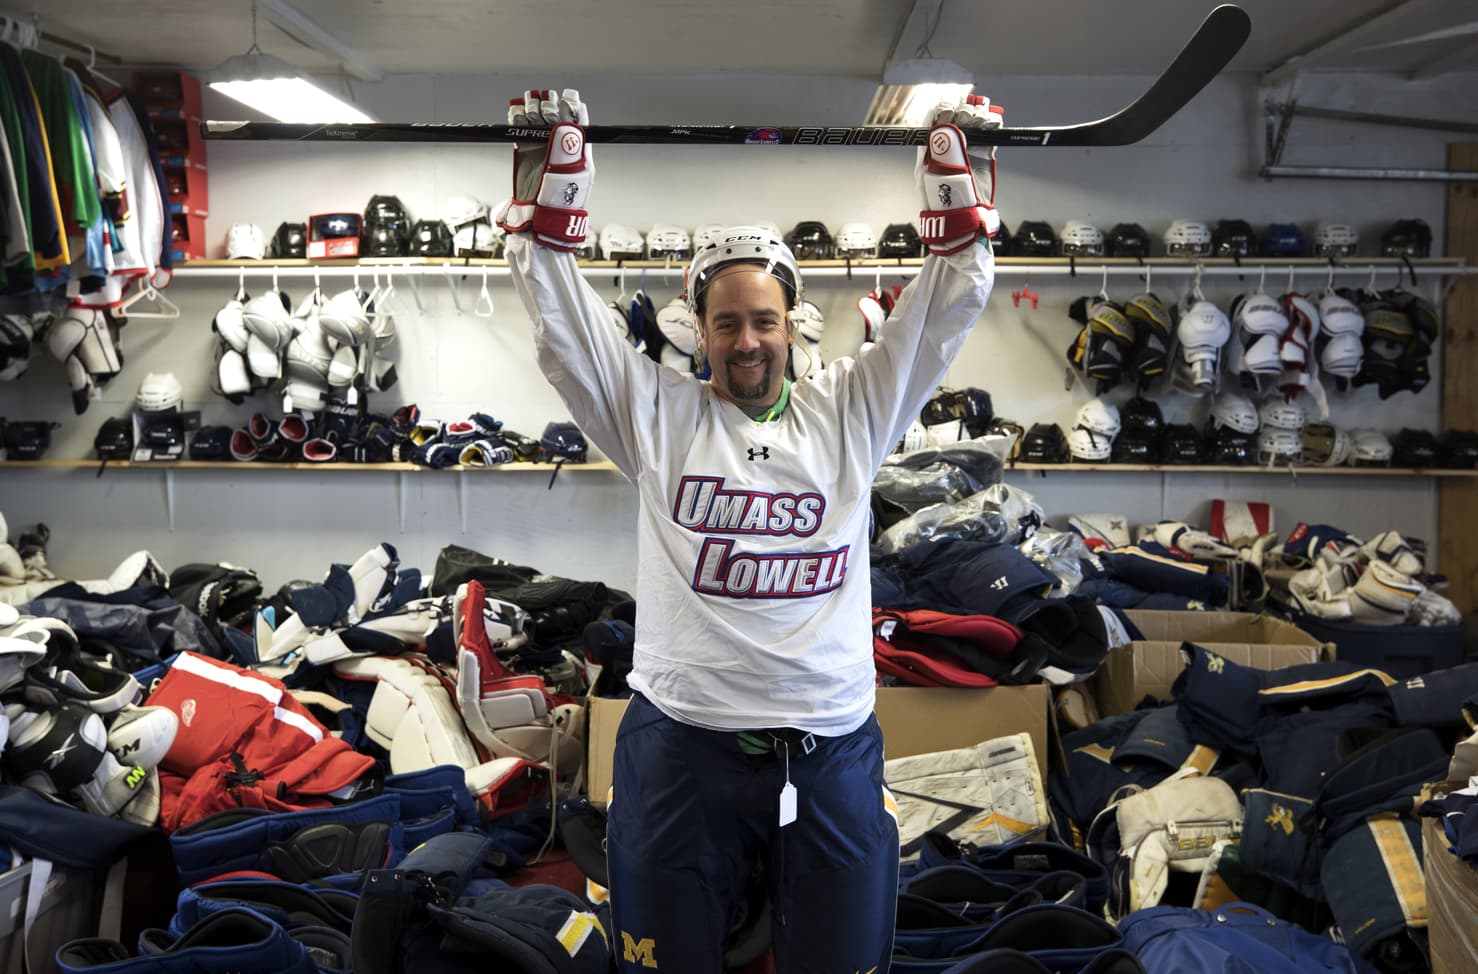 How Fanelli Hockey makes $100,000 a year selling used gear